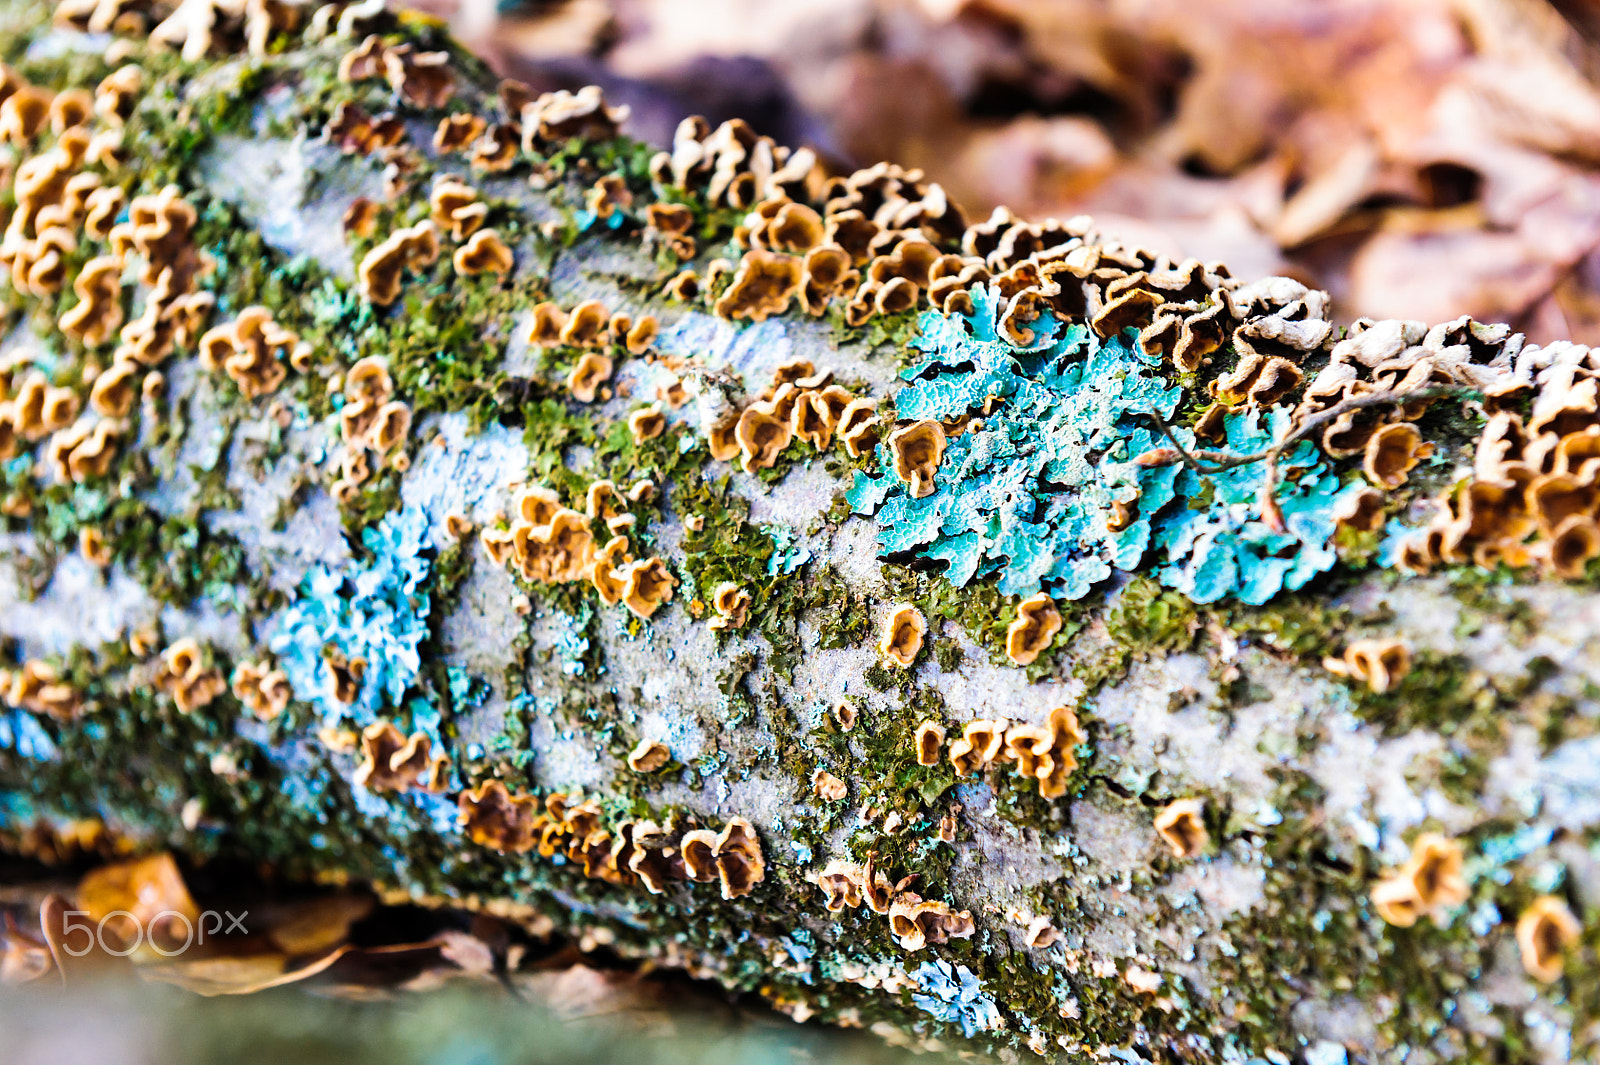 Nikon D700 sample photo. Tree overgrown with mushrooms with detail of moss and lichen on wooden fence photography